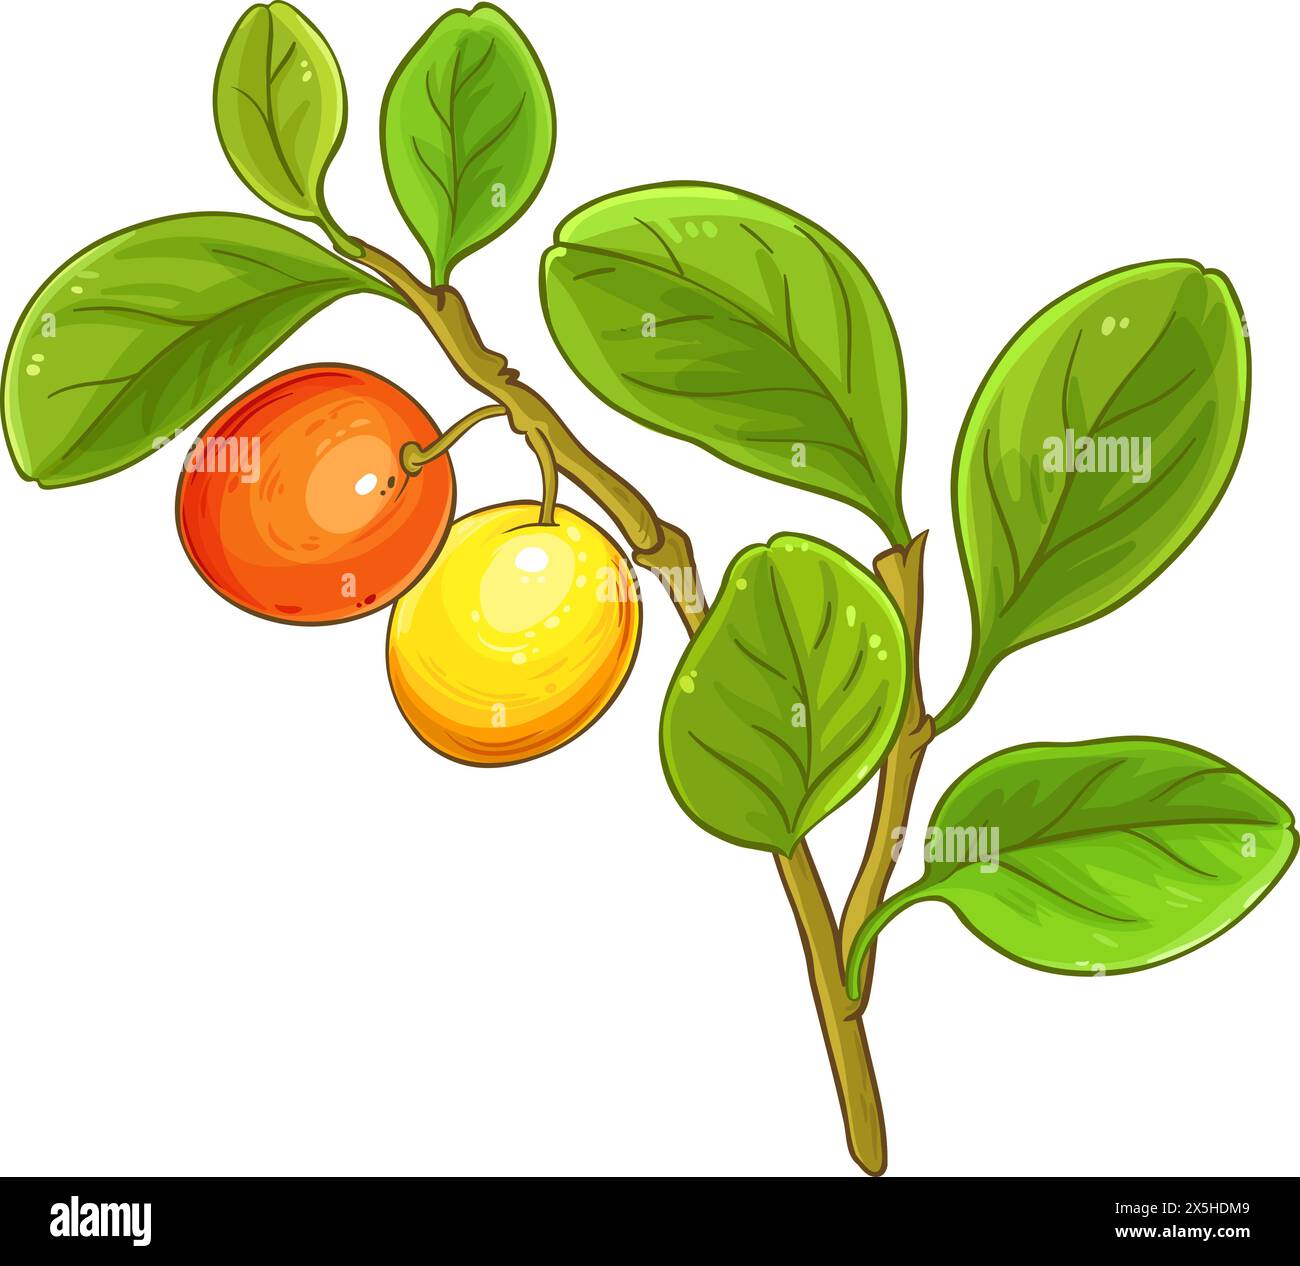 Ximenia Branch Colored Detailed Illustration. Stock Vector